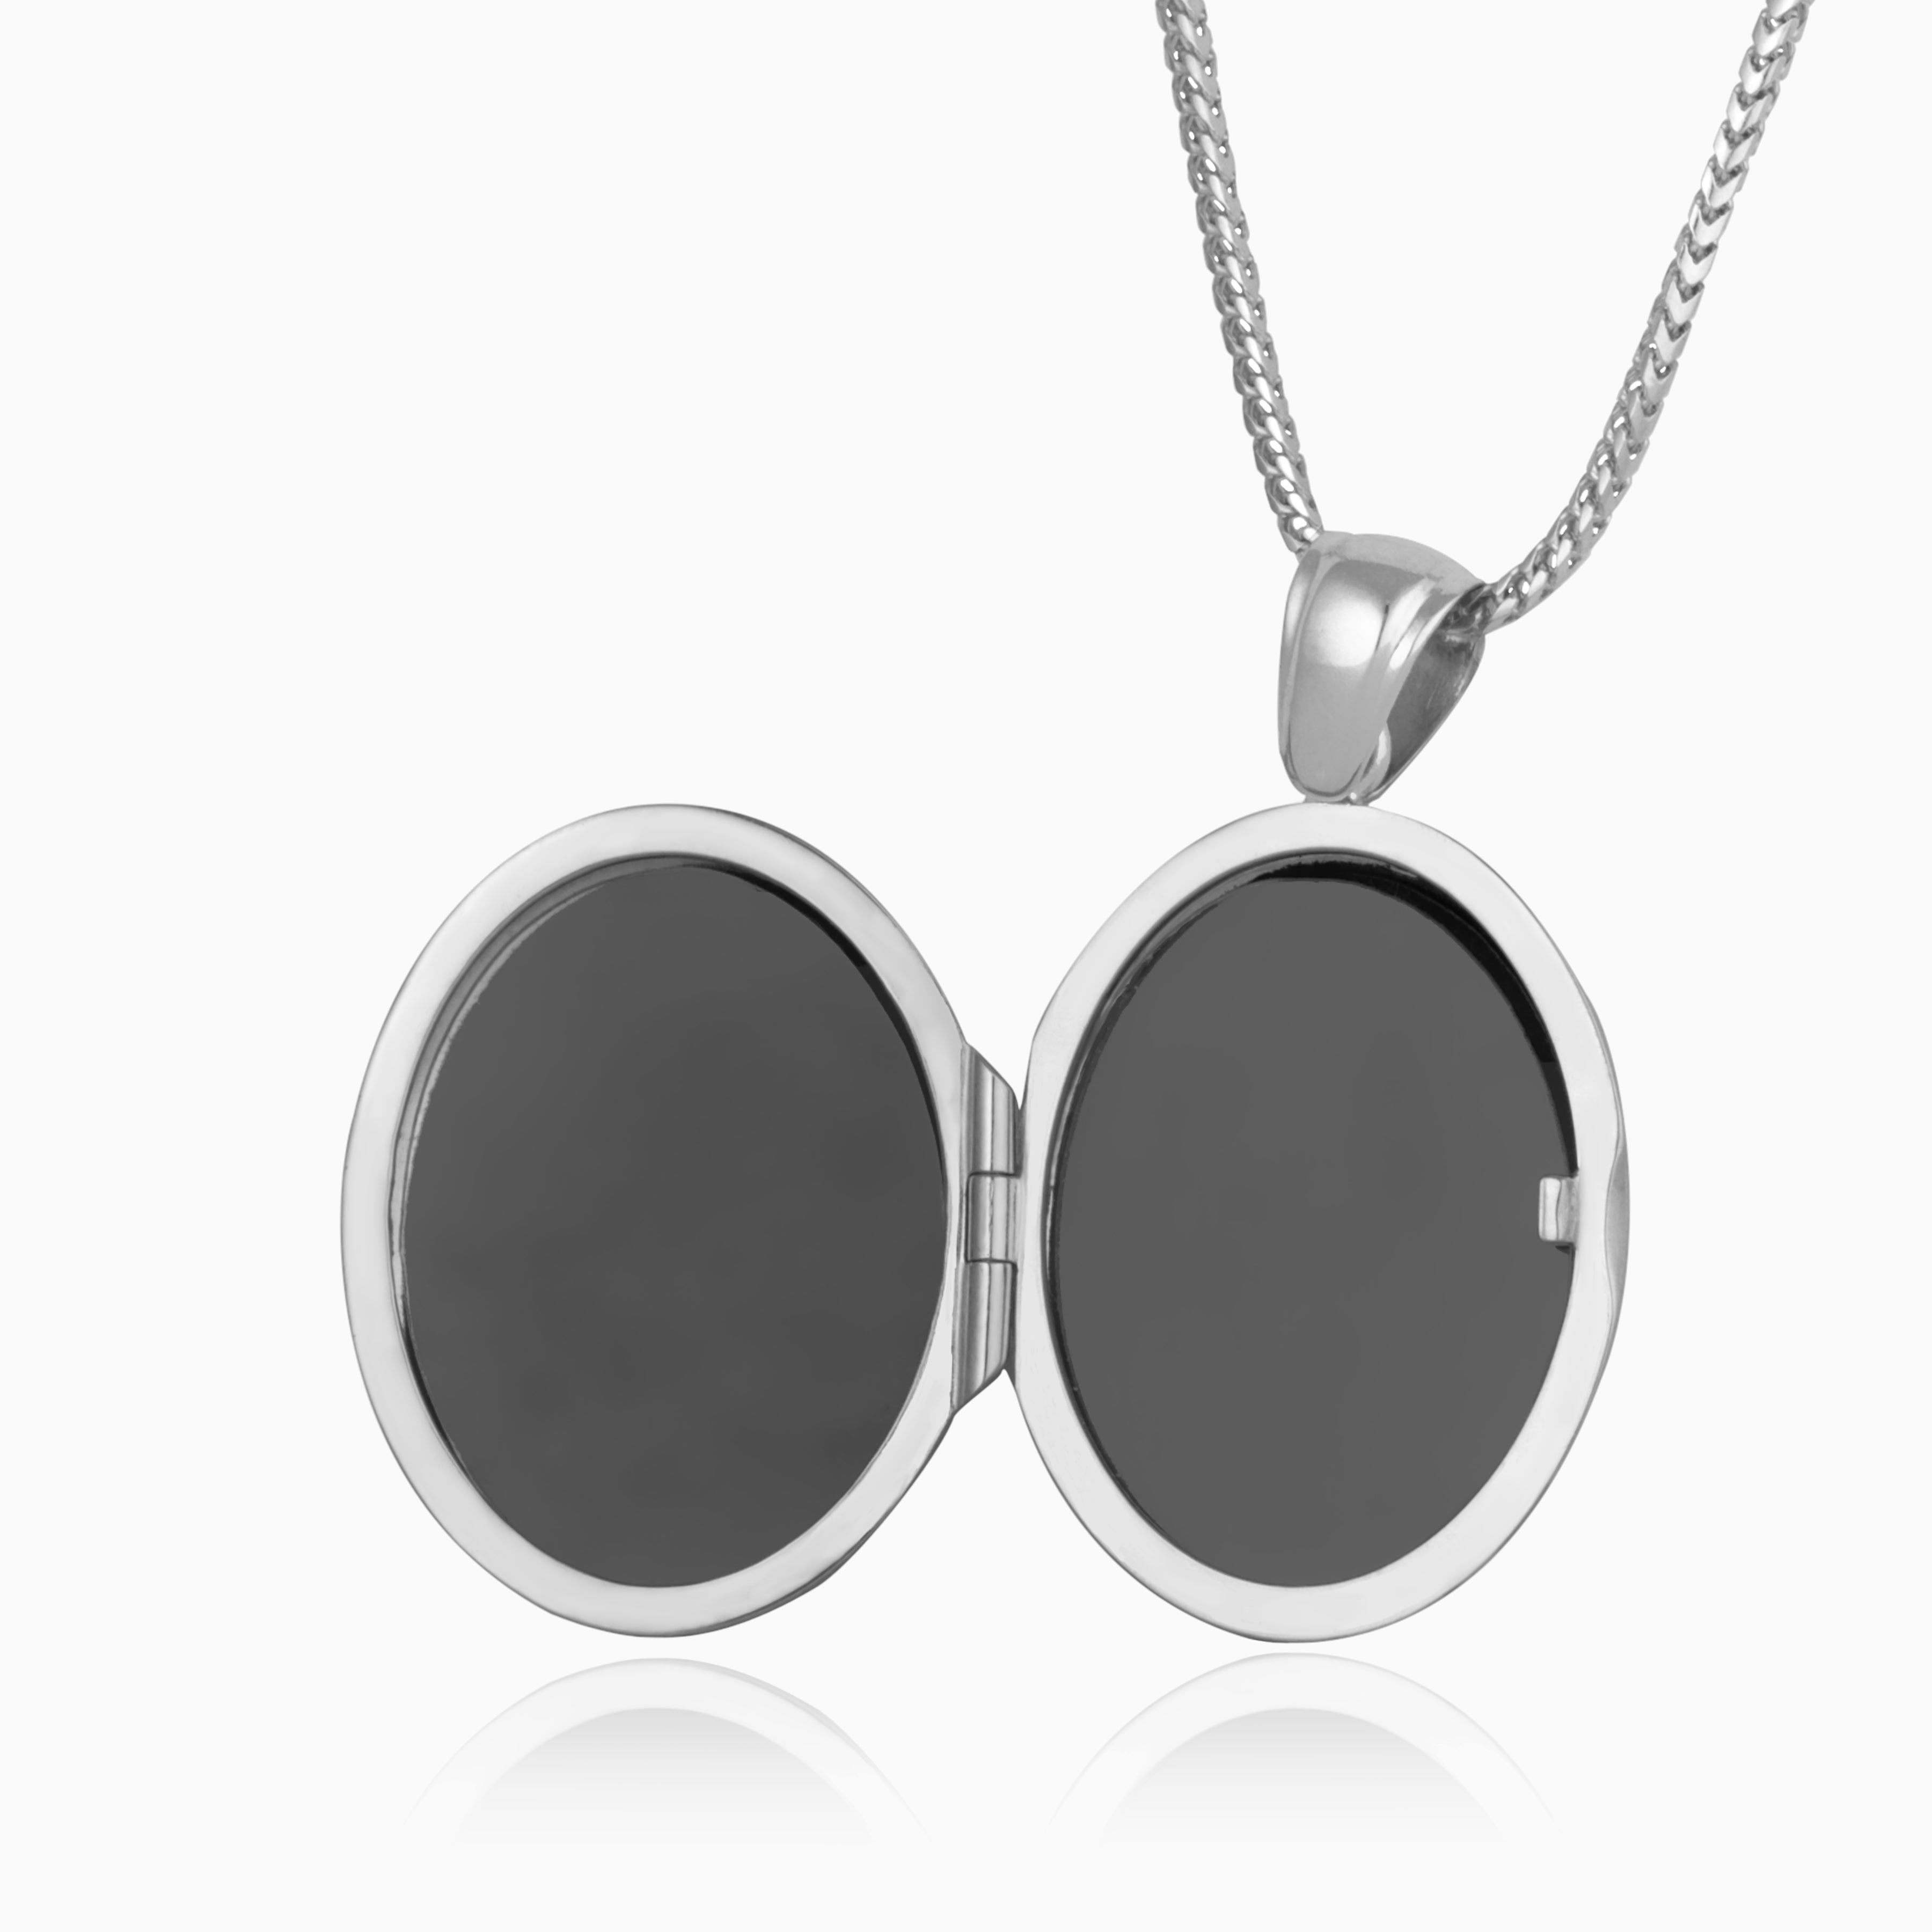 Product title: 18 ct White Gold Oval Locket, product type: Locket